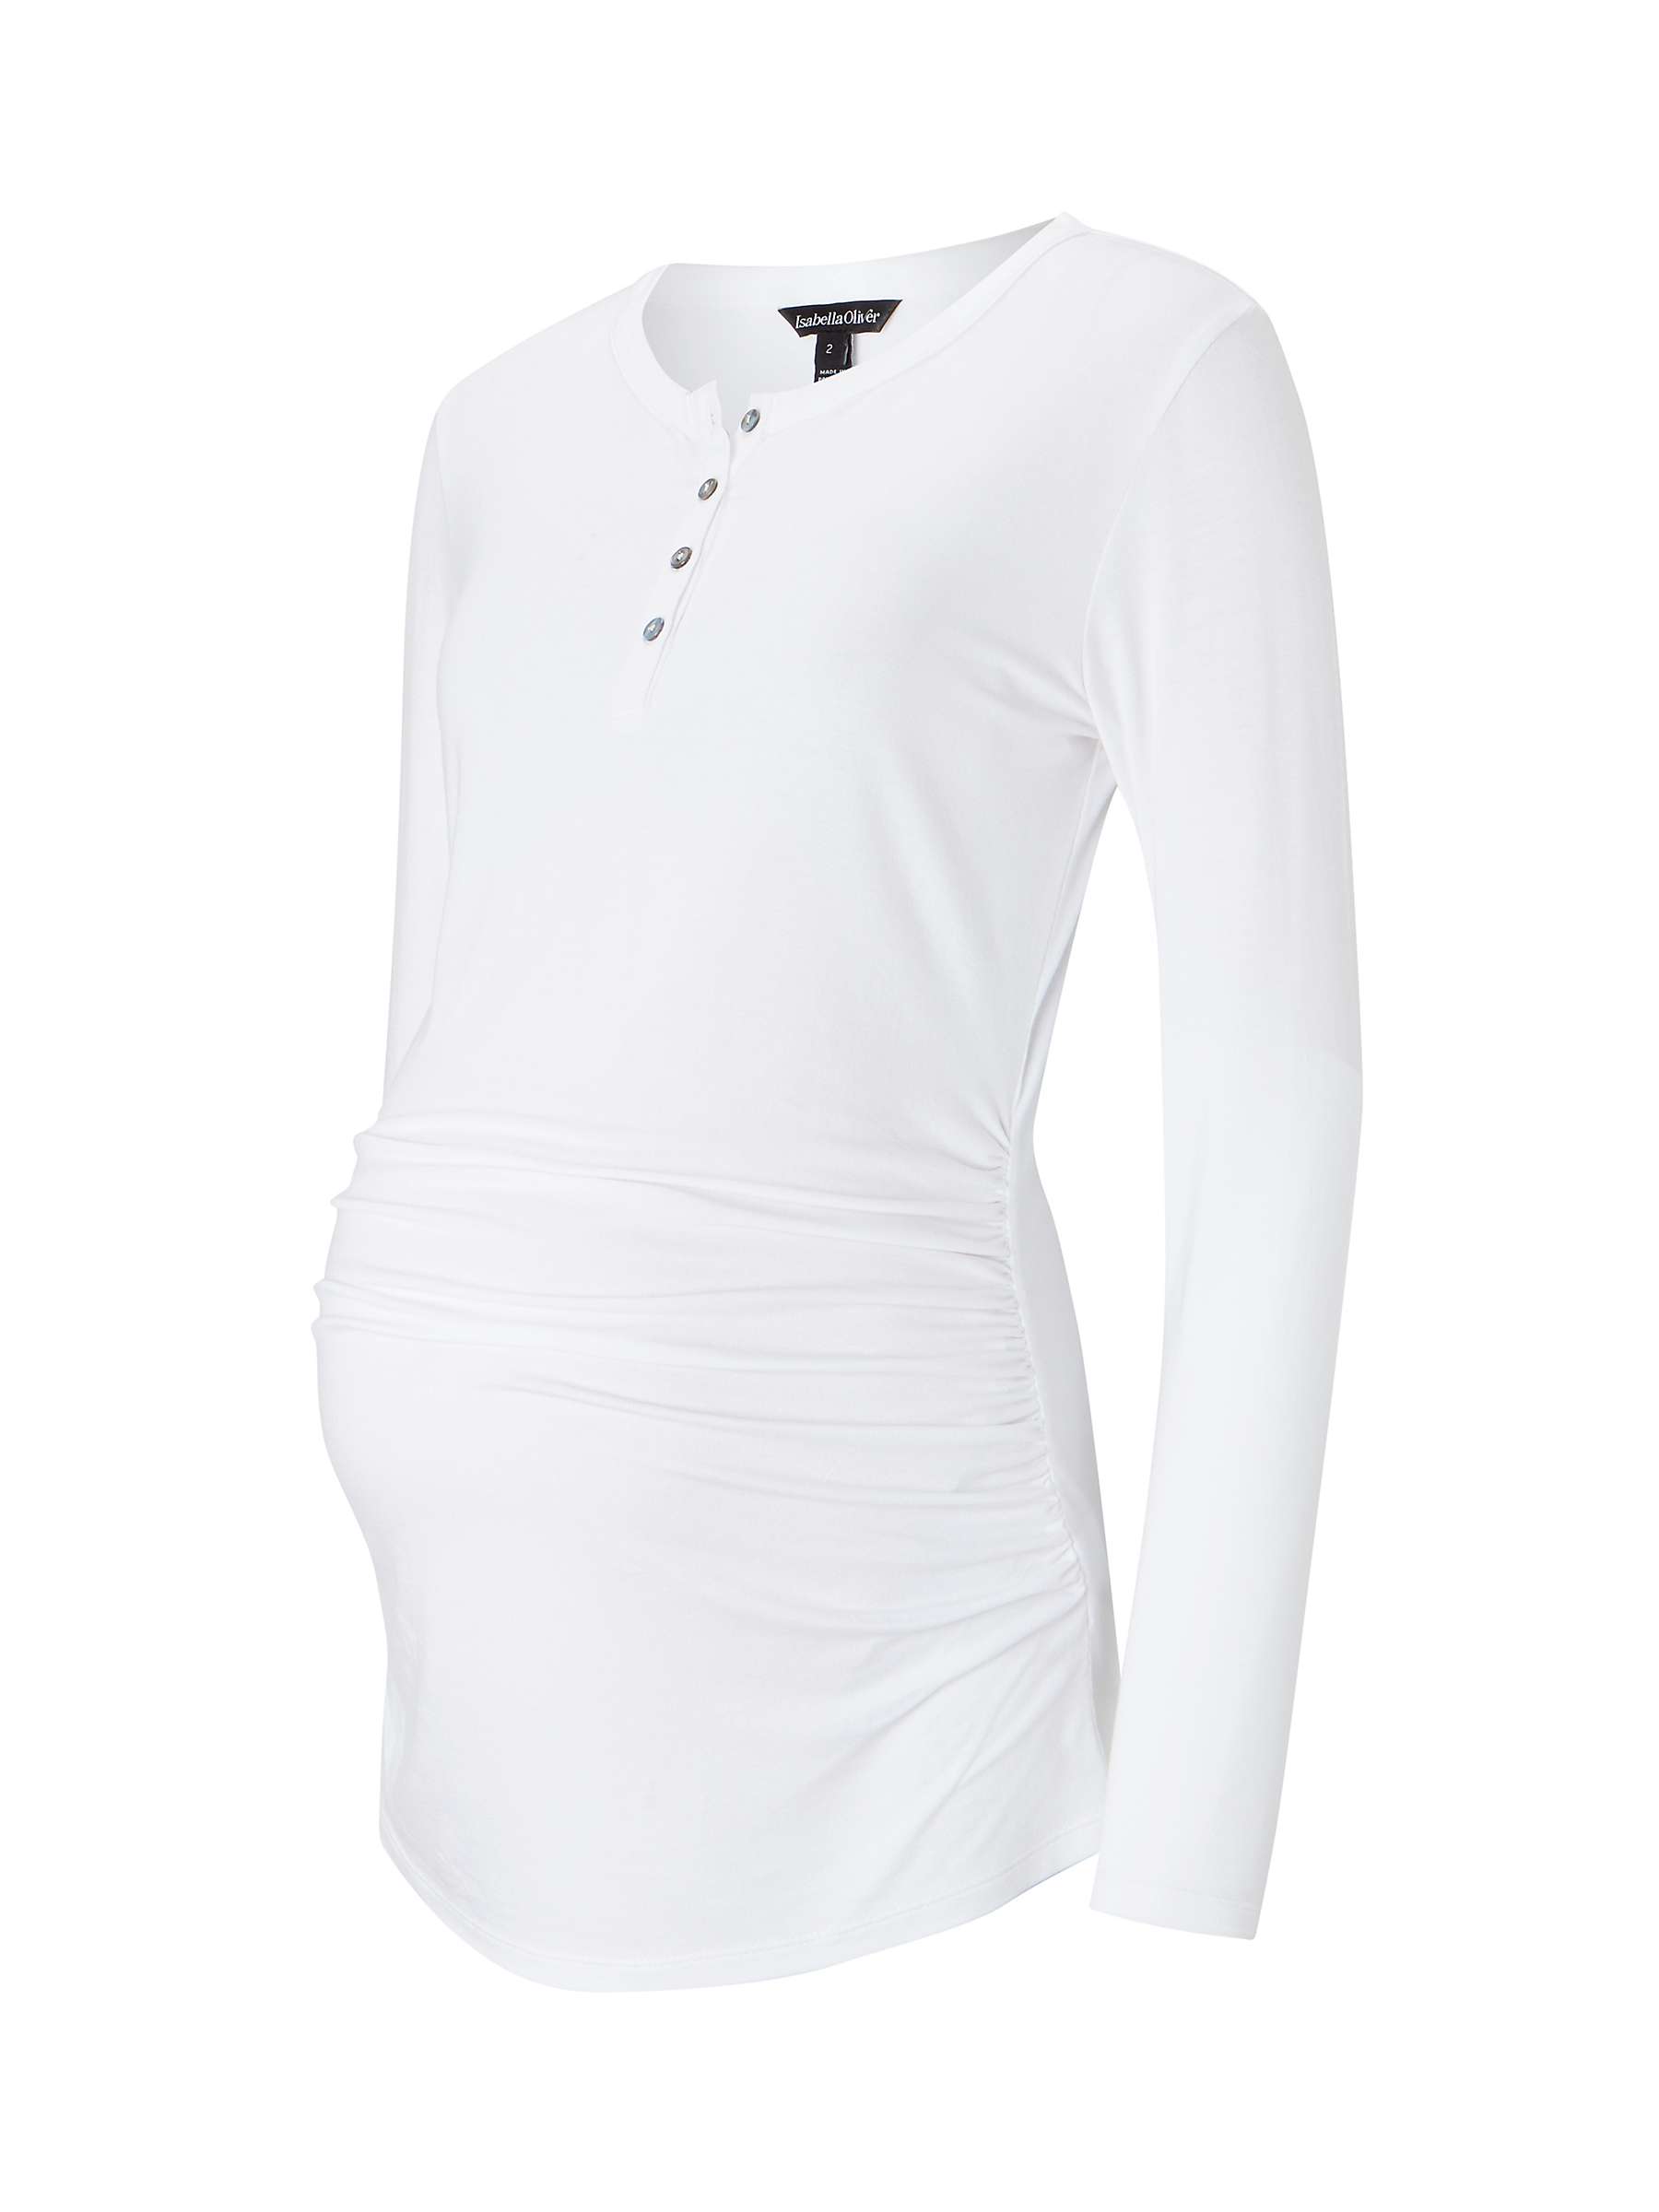 Buy Isabella Oliver Bacall Maternity Top, Soft White Online at johnlewis.com